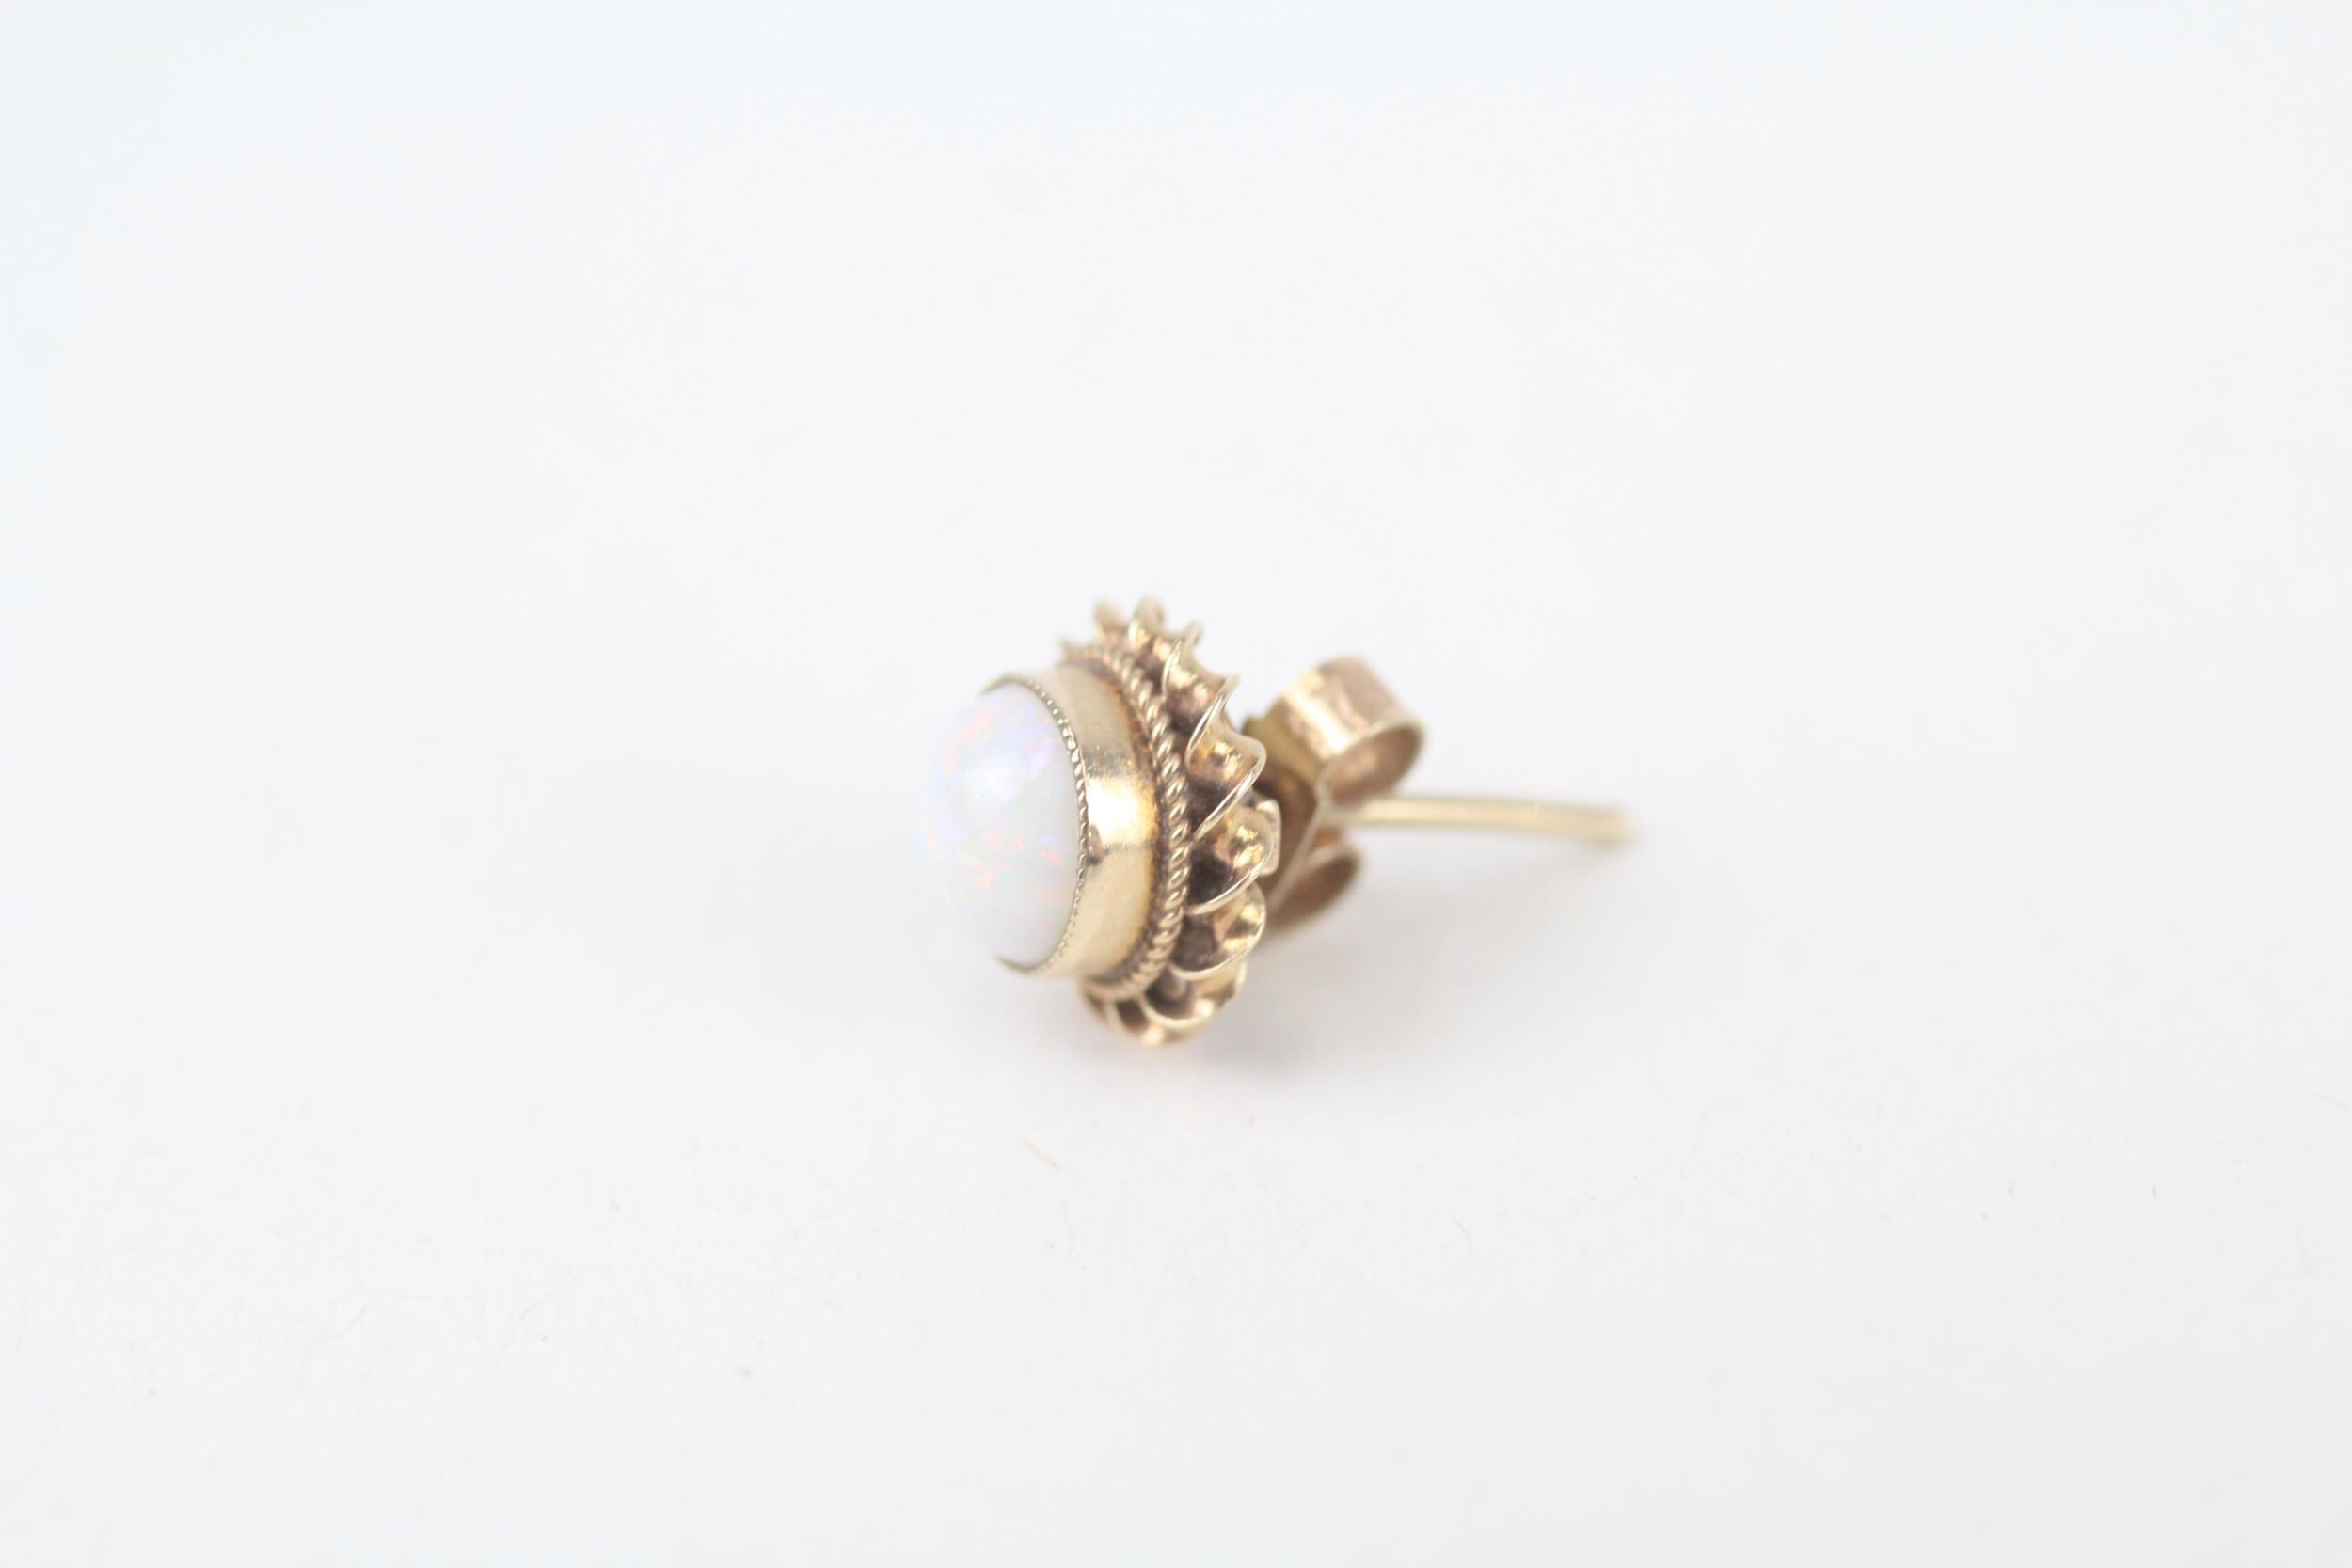 9ct gold round opal stud earrings - Image 3 of 4